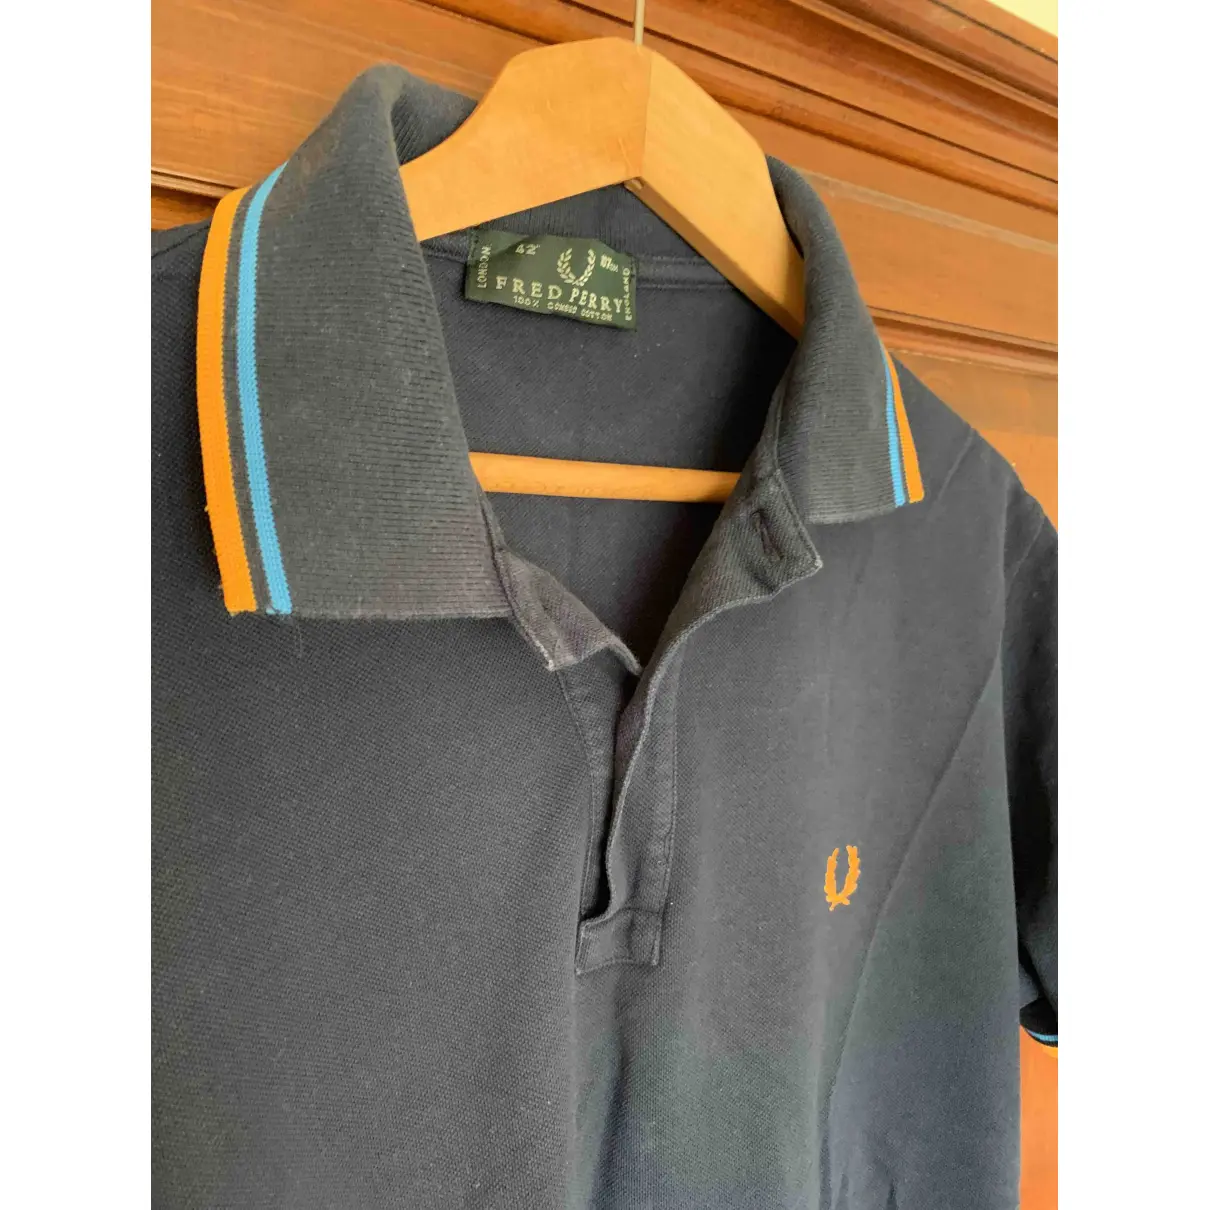 Buy Fred Perry Polo shirt online - Vintage